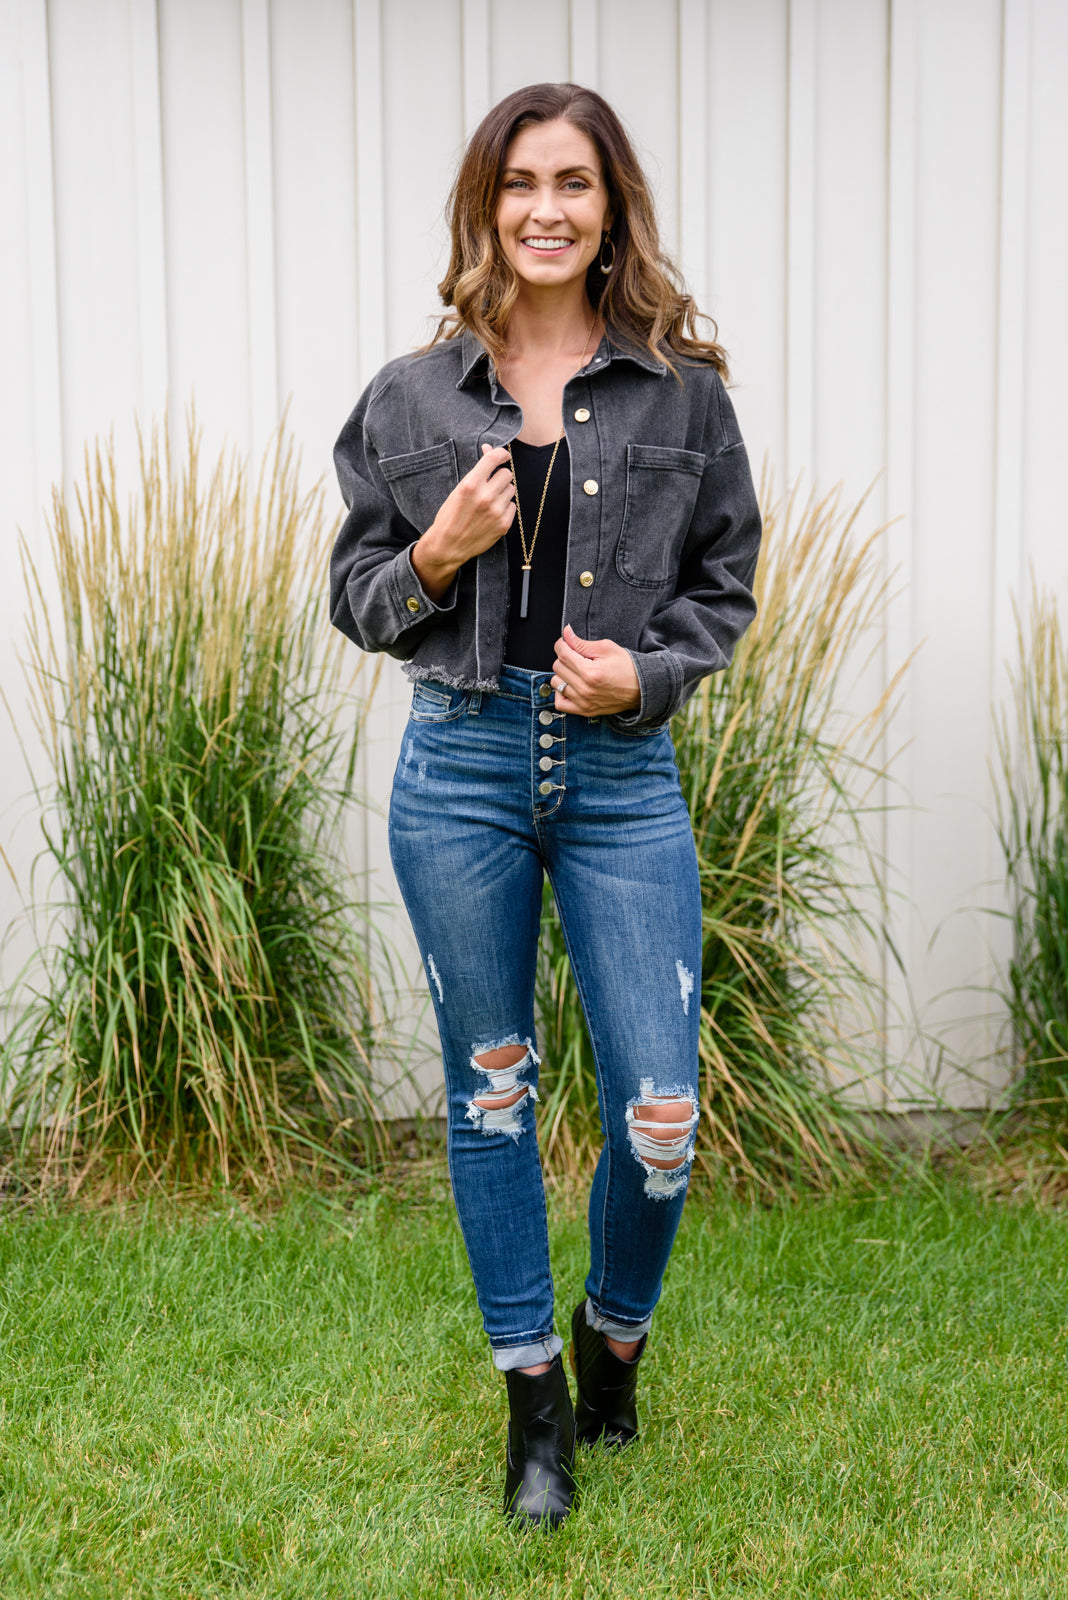 The Ari Hi-Rise Button Fly Cuffed Skinny jean is a must have denim staple! Hi-rise button fly and dark wash stretchy denim. Judy Blue Stretchy + Button fly + Distressed knees near me.